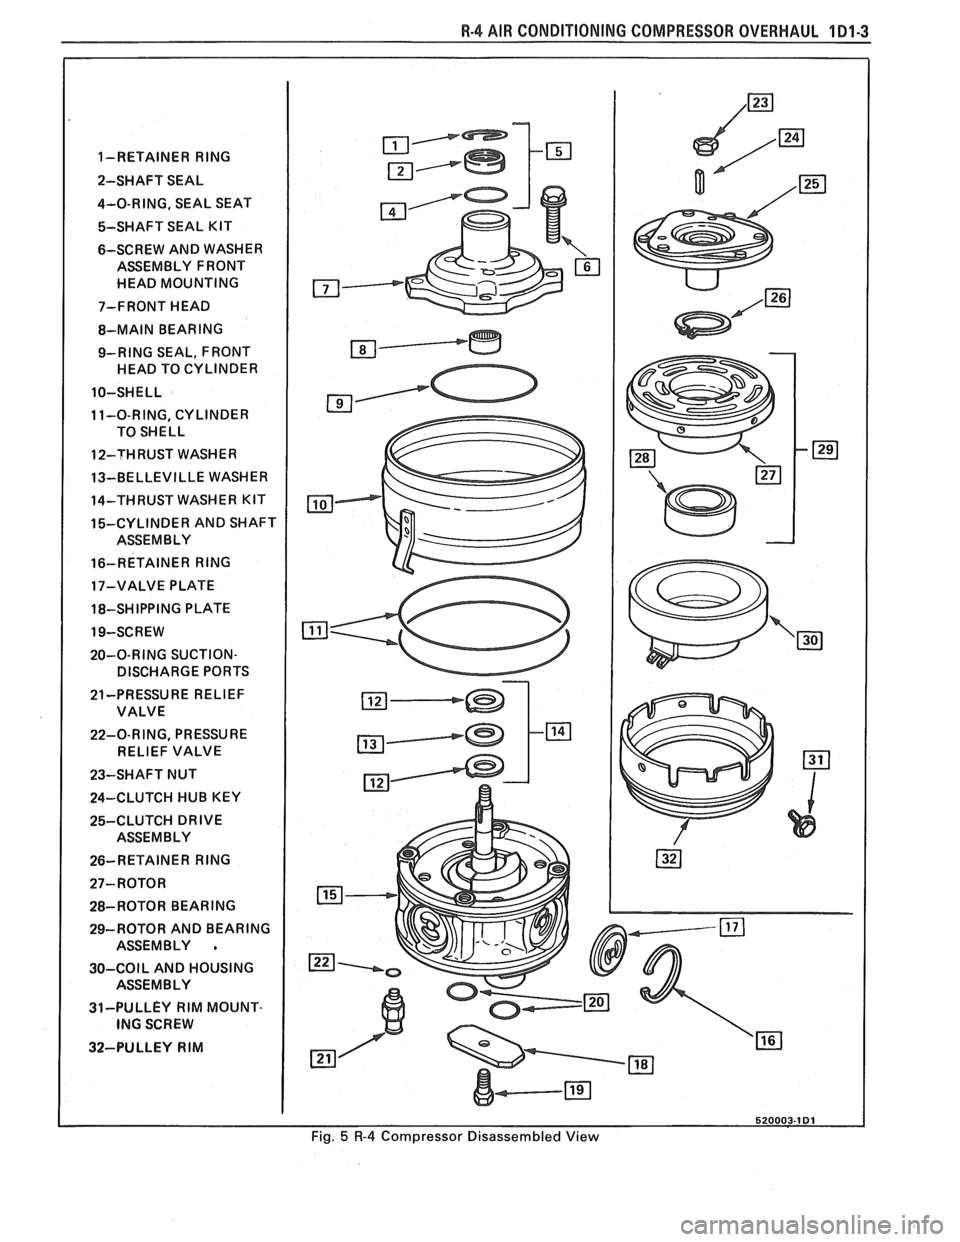 PONTIAC FIERO 1988  Service Repair Manual 
R-4 AIR CONDITIONING  COMPRESSOR OVERHAUL 101-3 
1-RETAINER RlNG 
2-SHAFT  SEAL  
4-O-RING,  SEAL  SEAT 
%-SHAFT SEAL KIT 
6-SCREW  AND WASHER 
ASSEMBLY  FRONT 
HEAD  MOUNTING 
7-FRONT  HEAD 
8-MAIN 